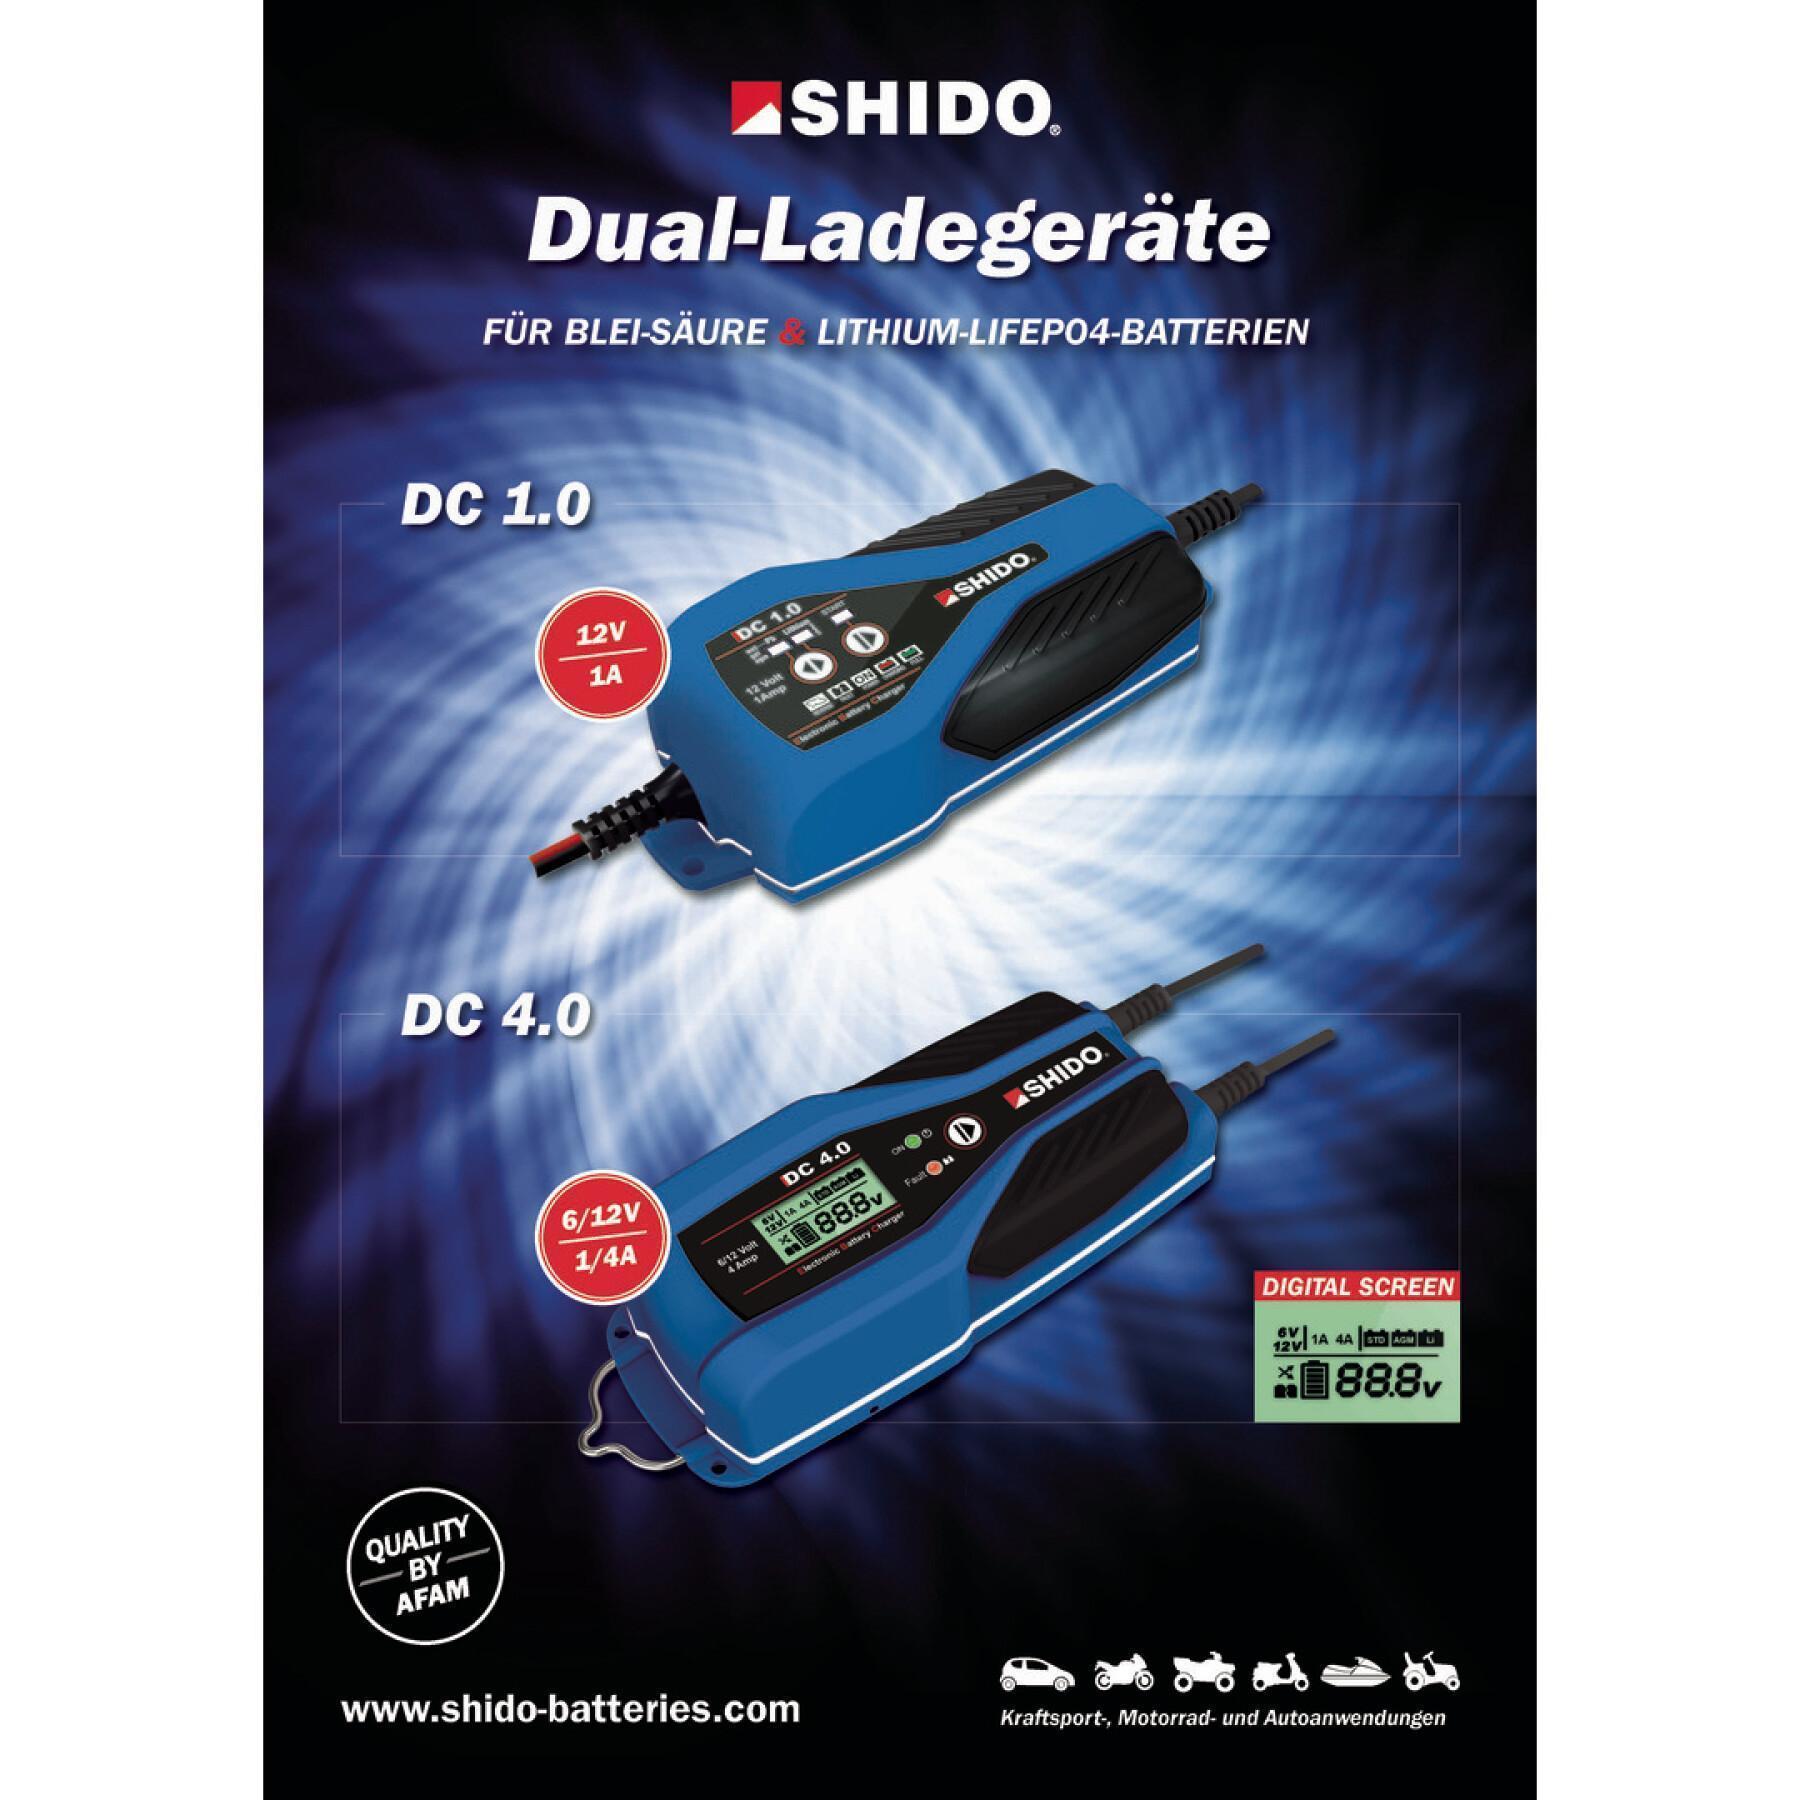 Motorcycle battery charger Shido DC 4.0